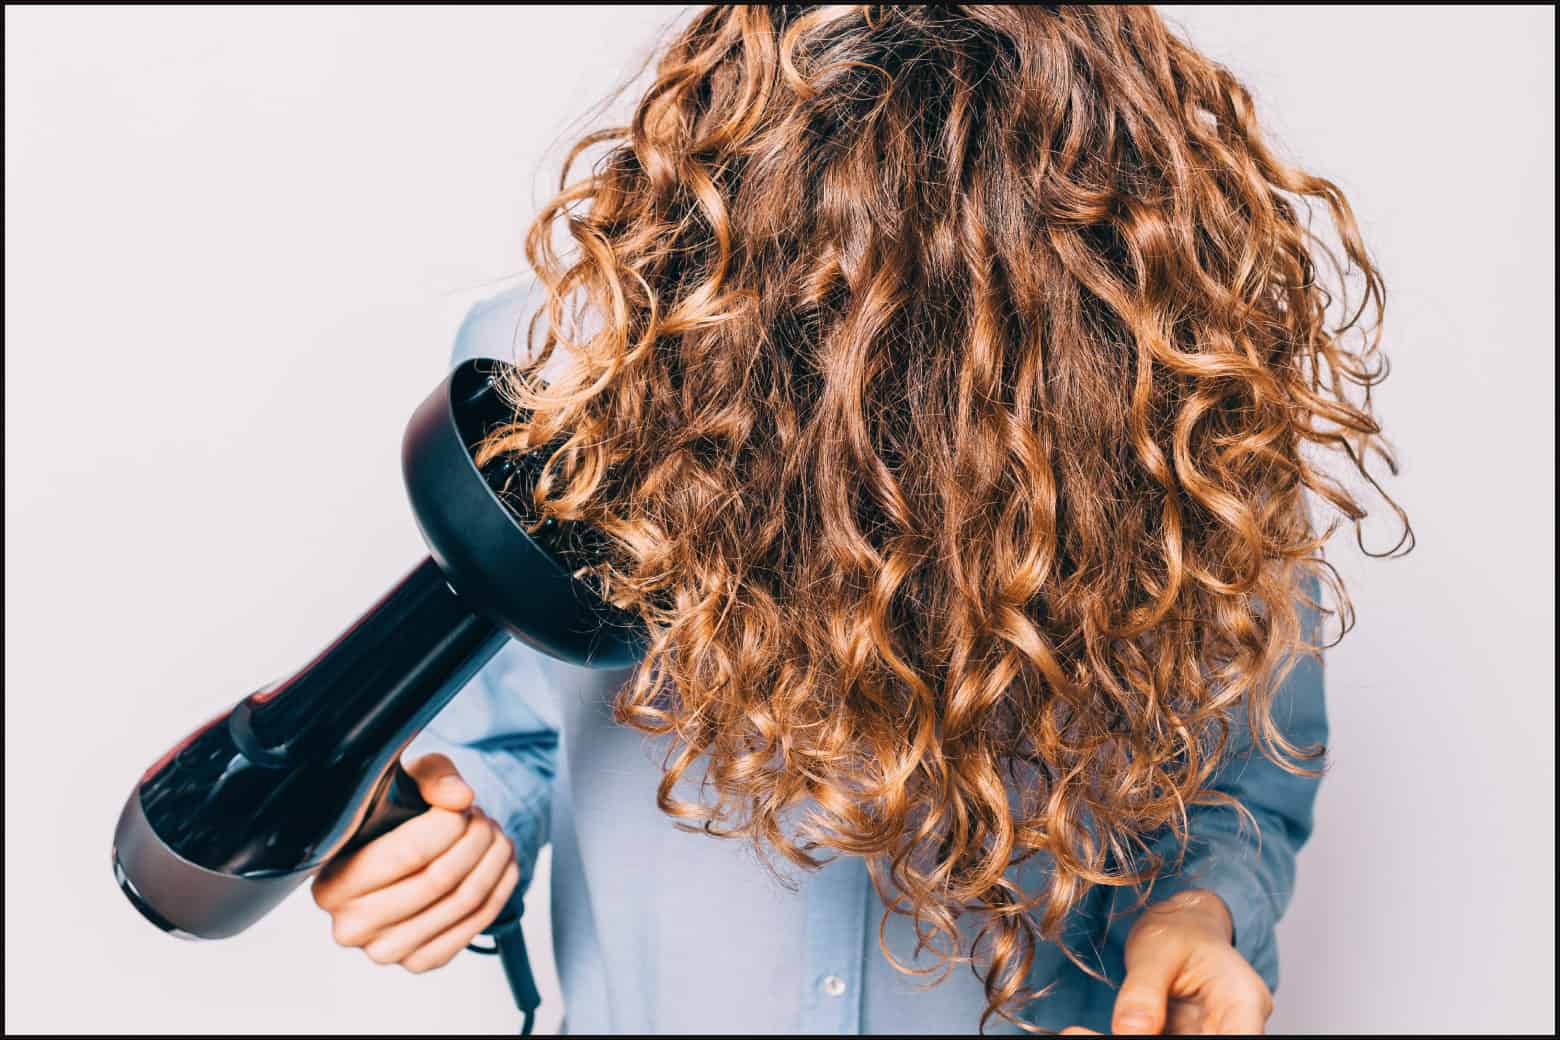 person with light brown curly hair holding head down to dry hair with a blow dryer and diffuser attachment